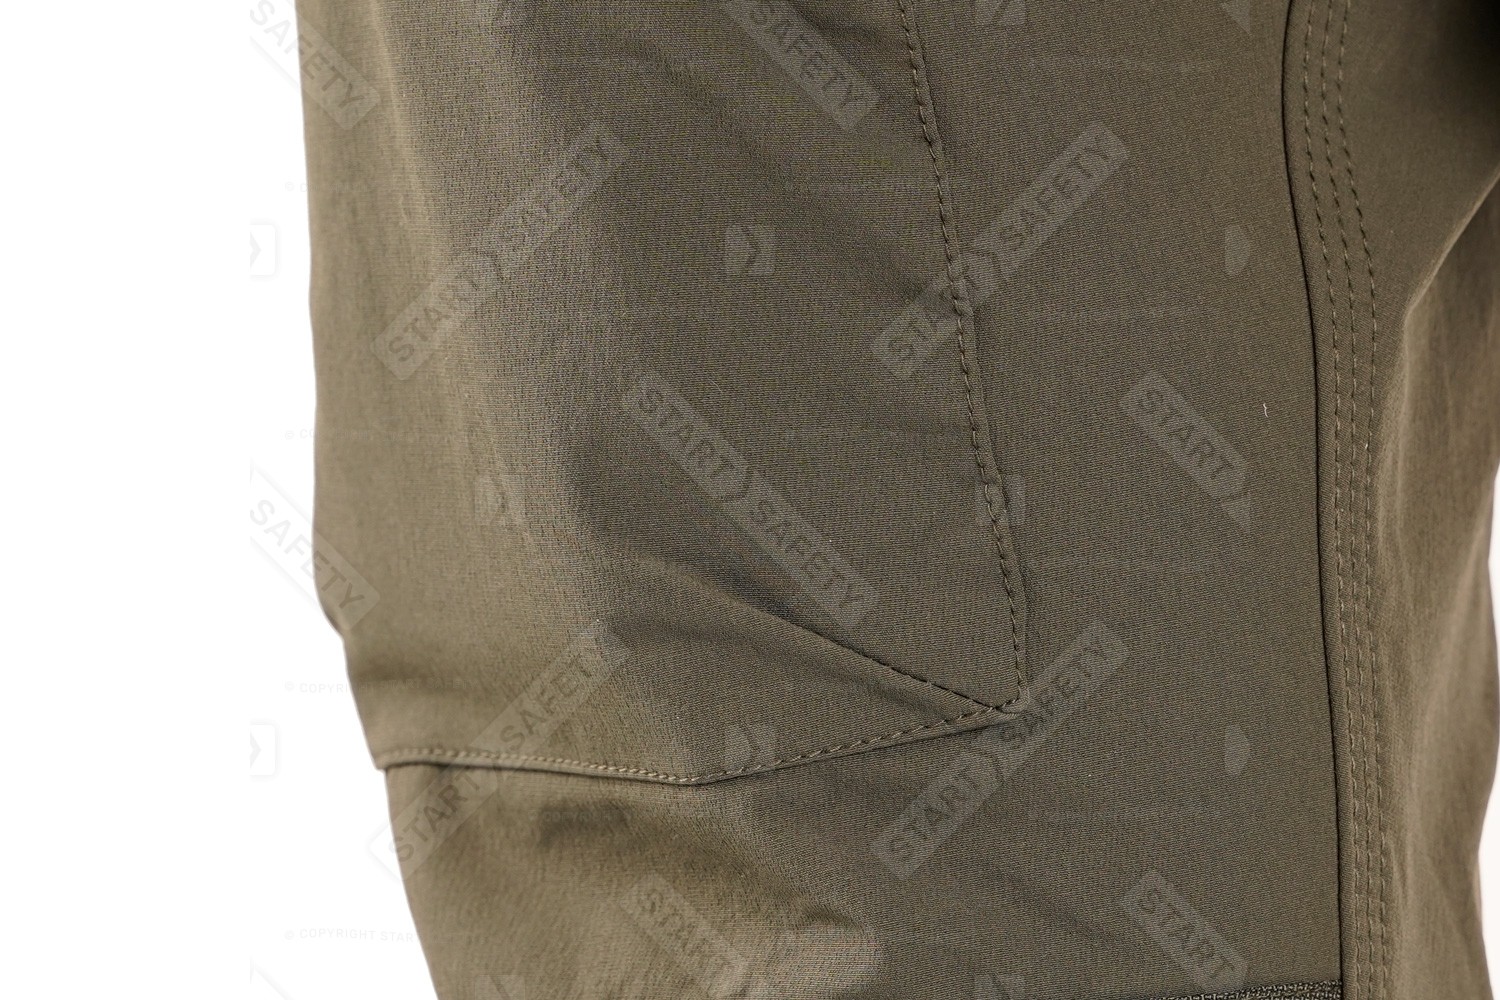 Breathable Trouser Material